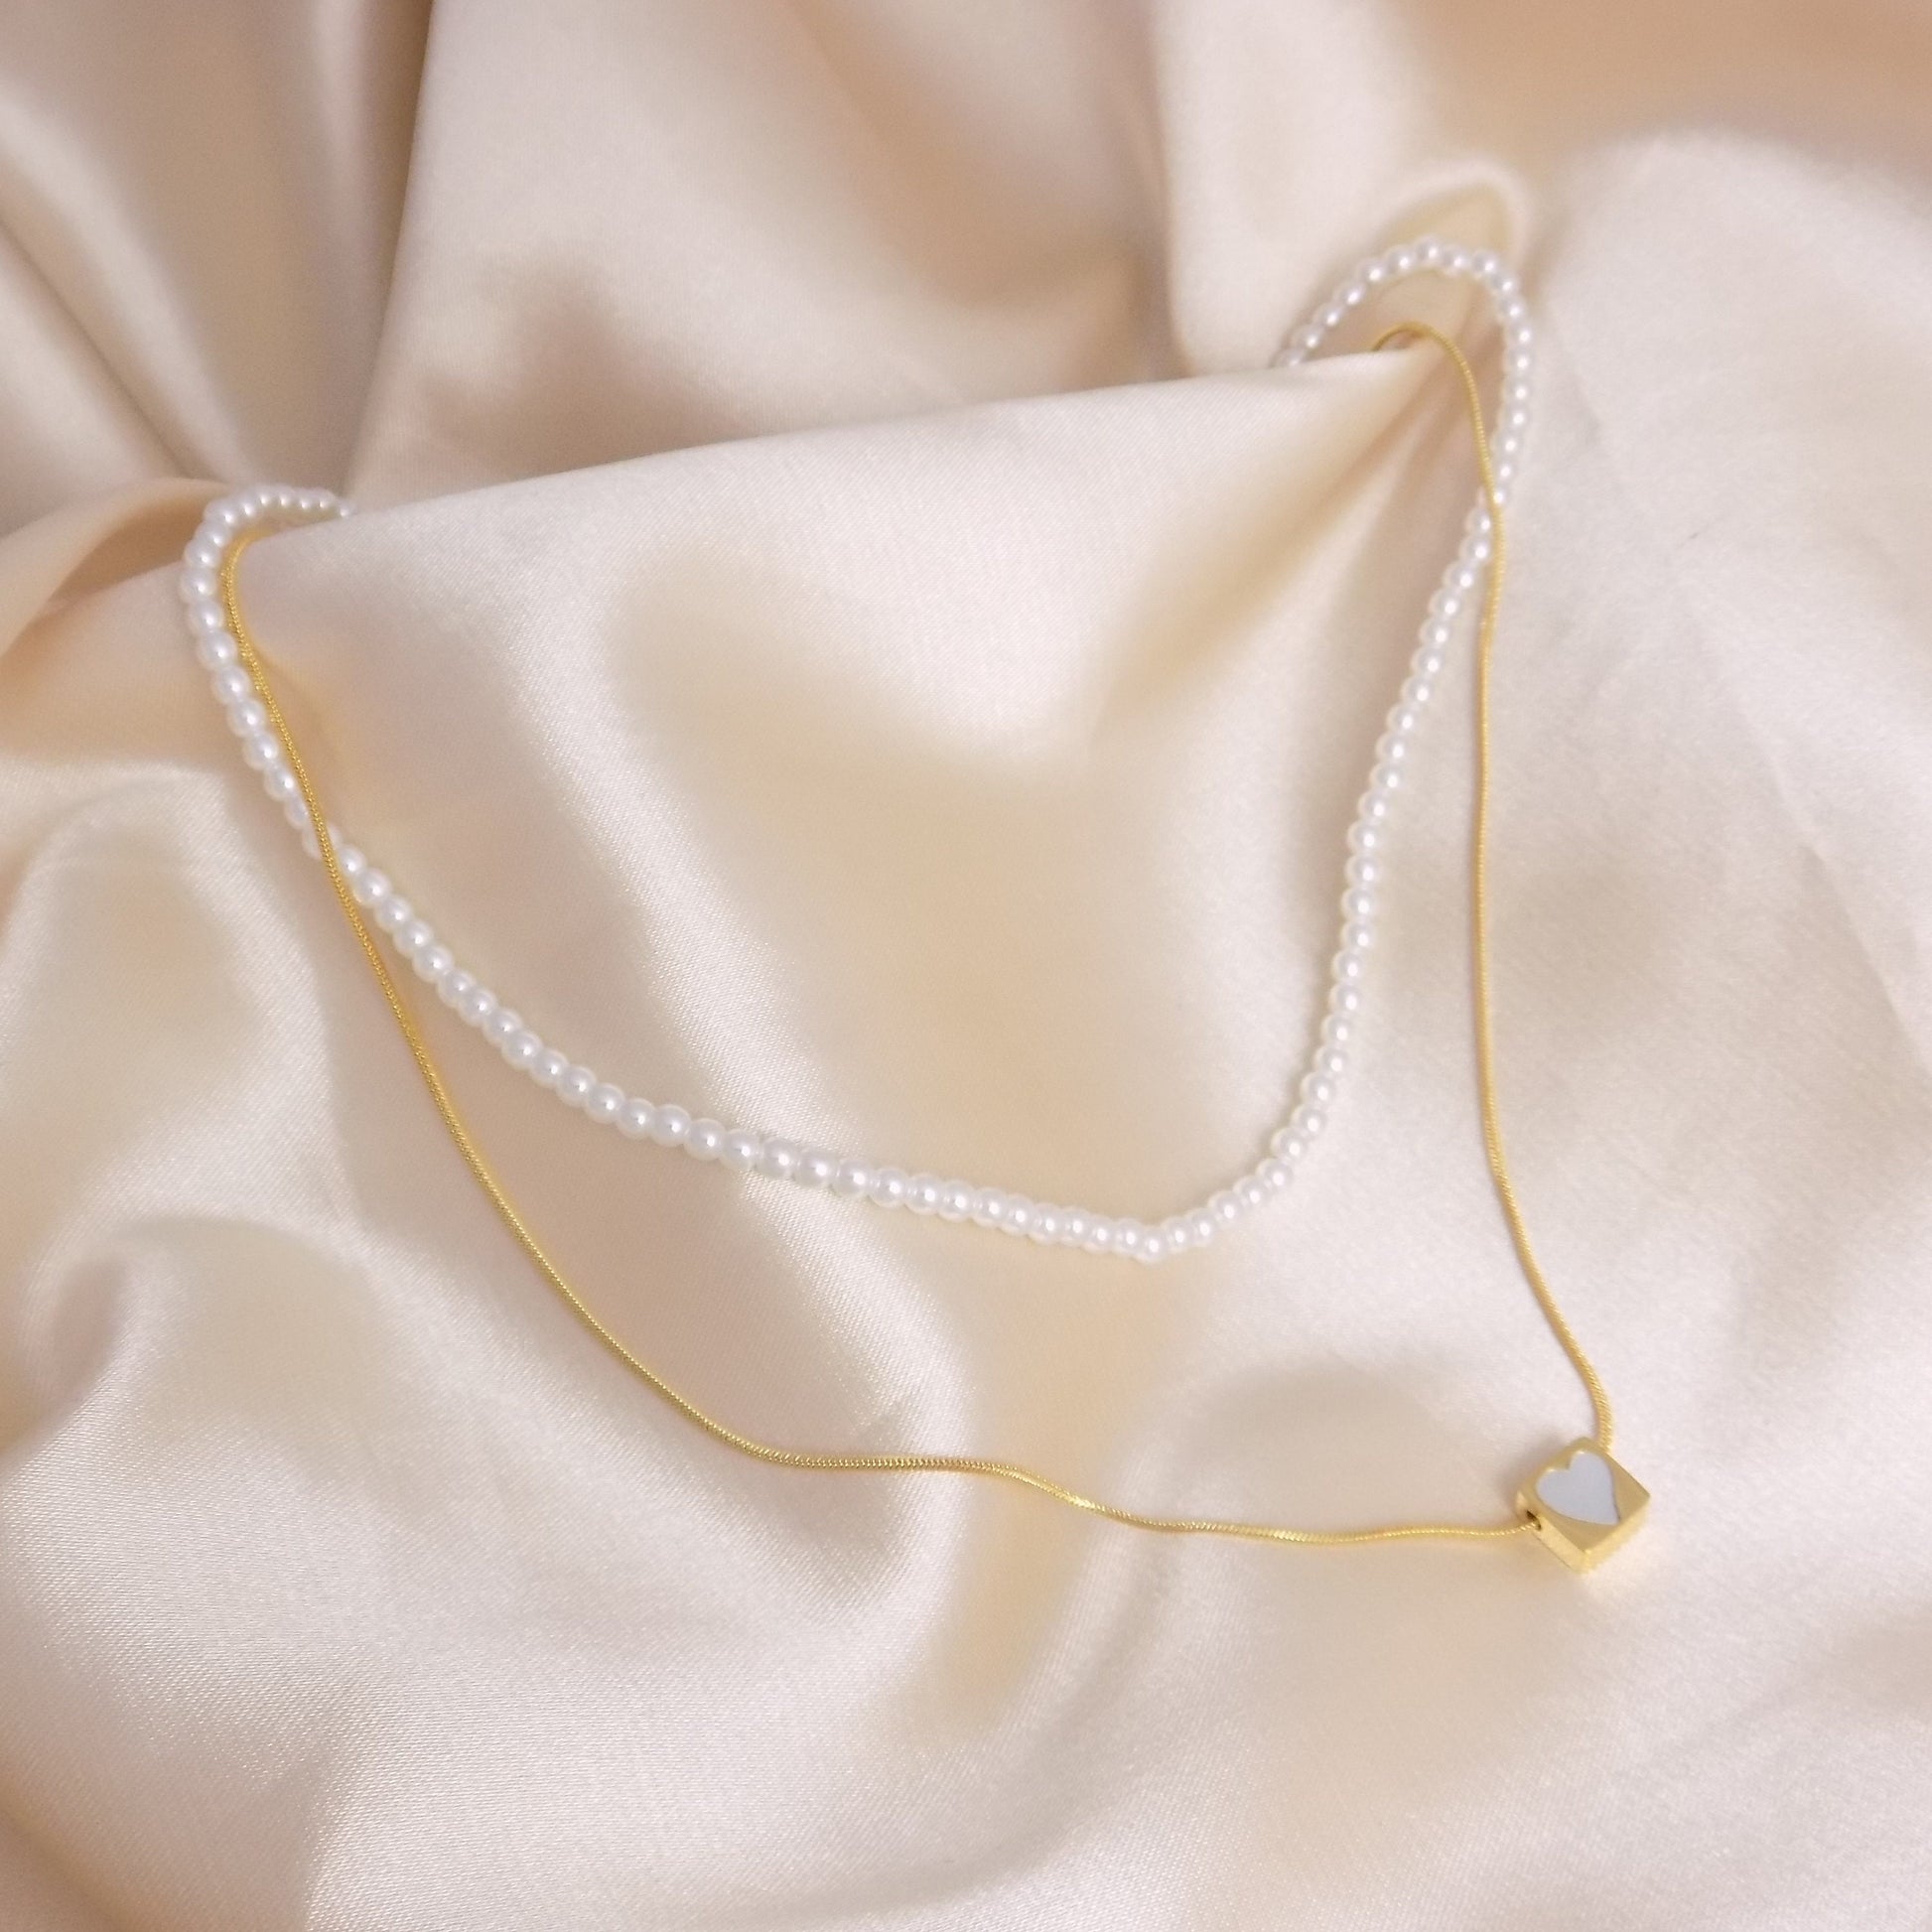 Gold Layered Choker Necklace Set For Women, White Pearl Necklace, Mop Heart Charm, 18K Gold Stainless Steel, Modern Trendy, M7-123